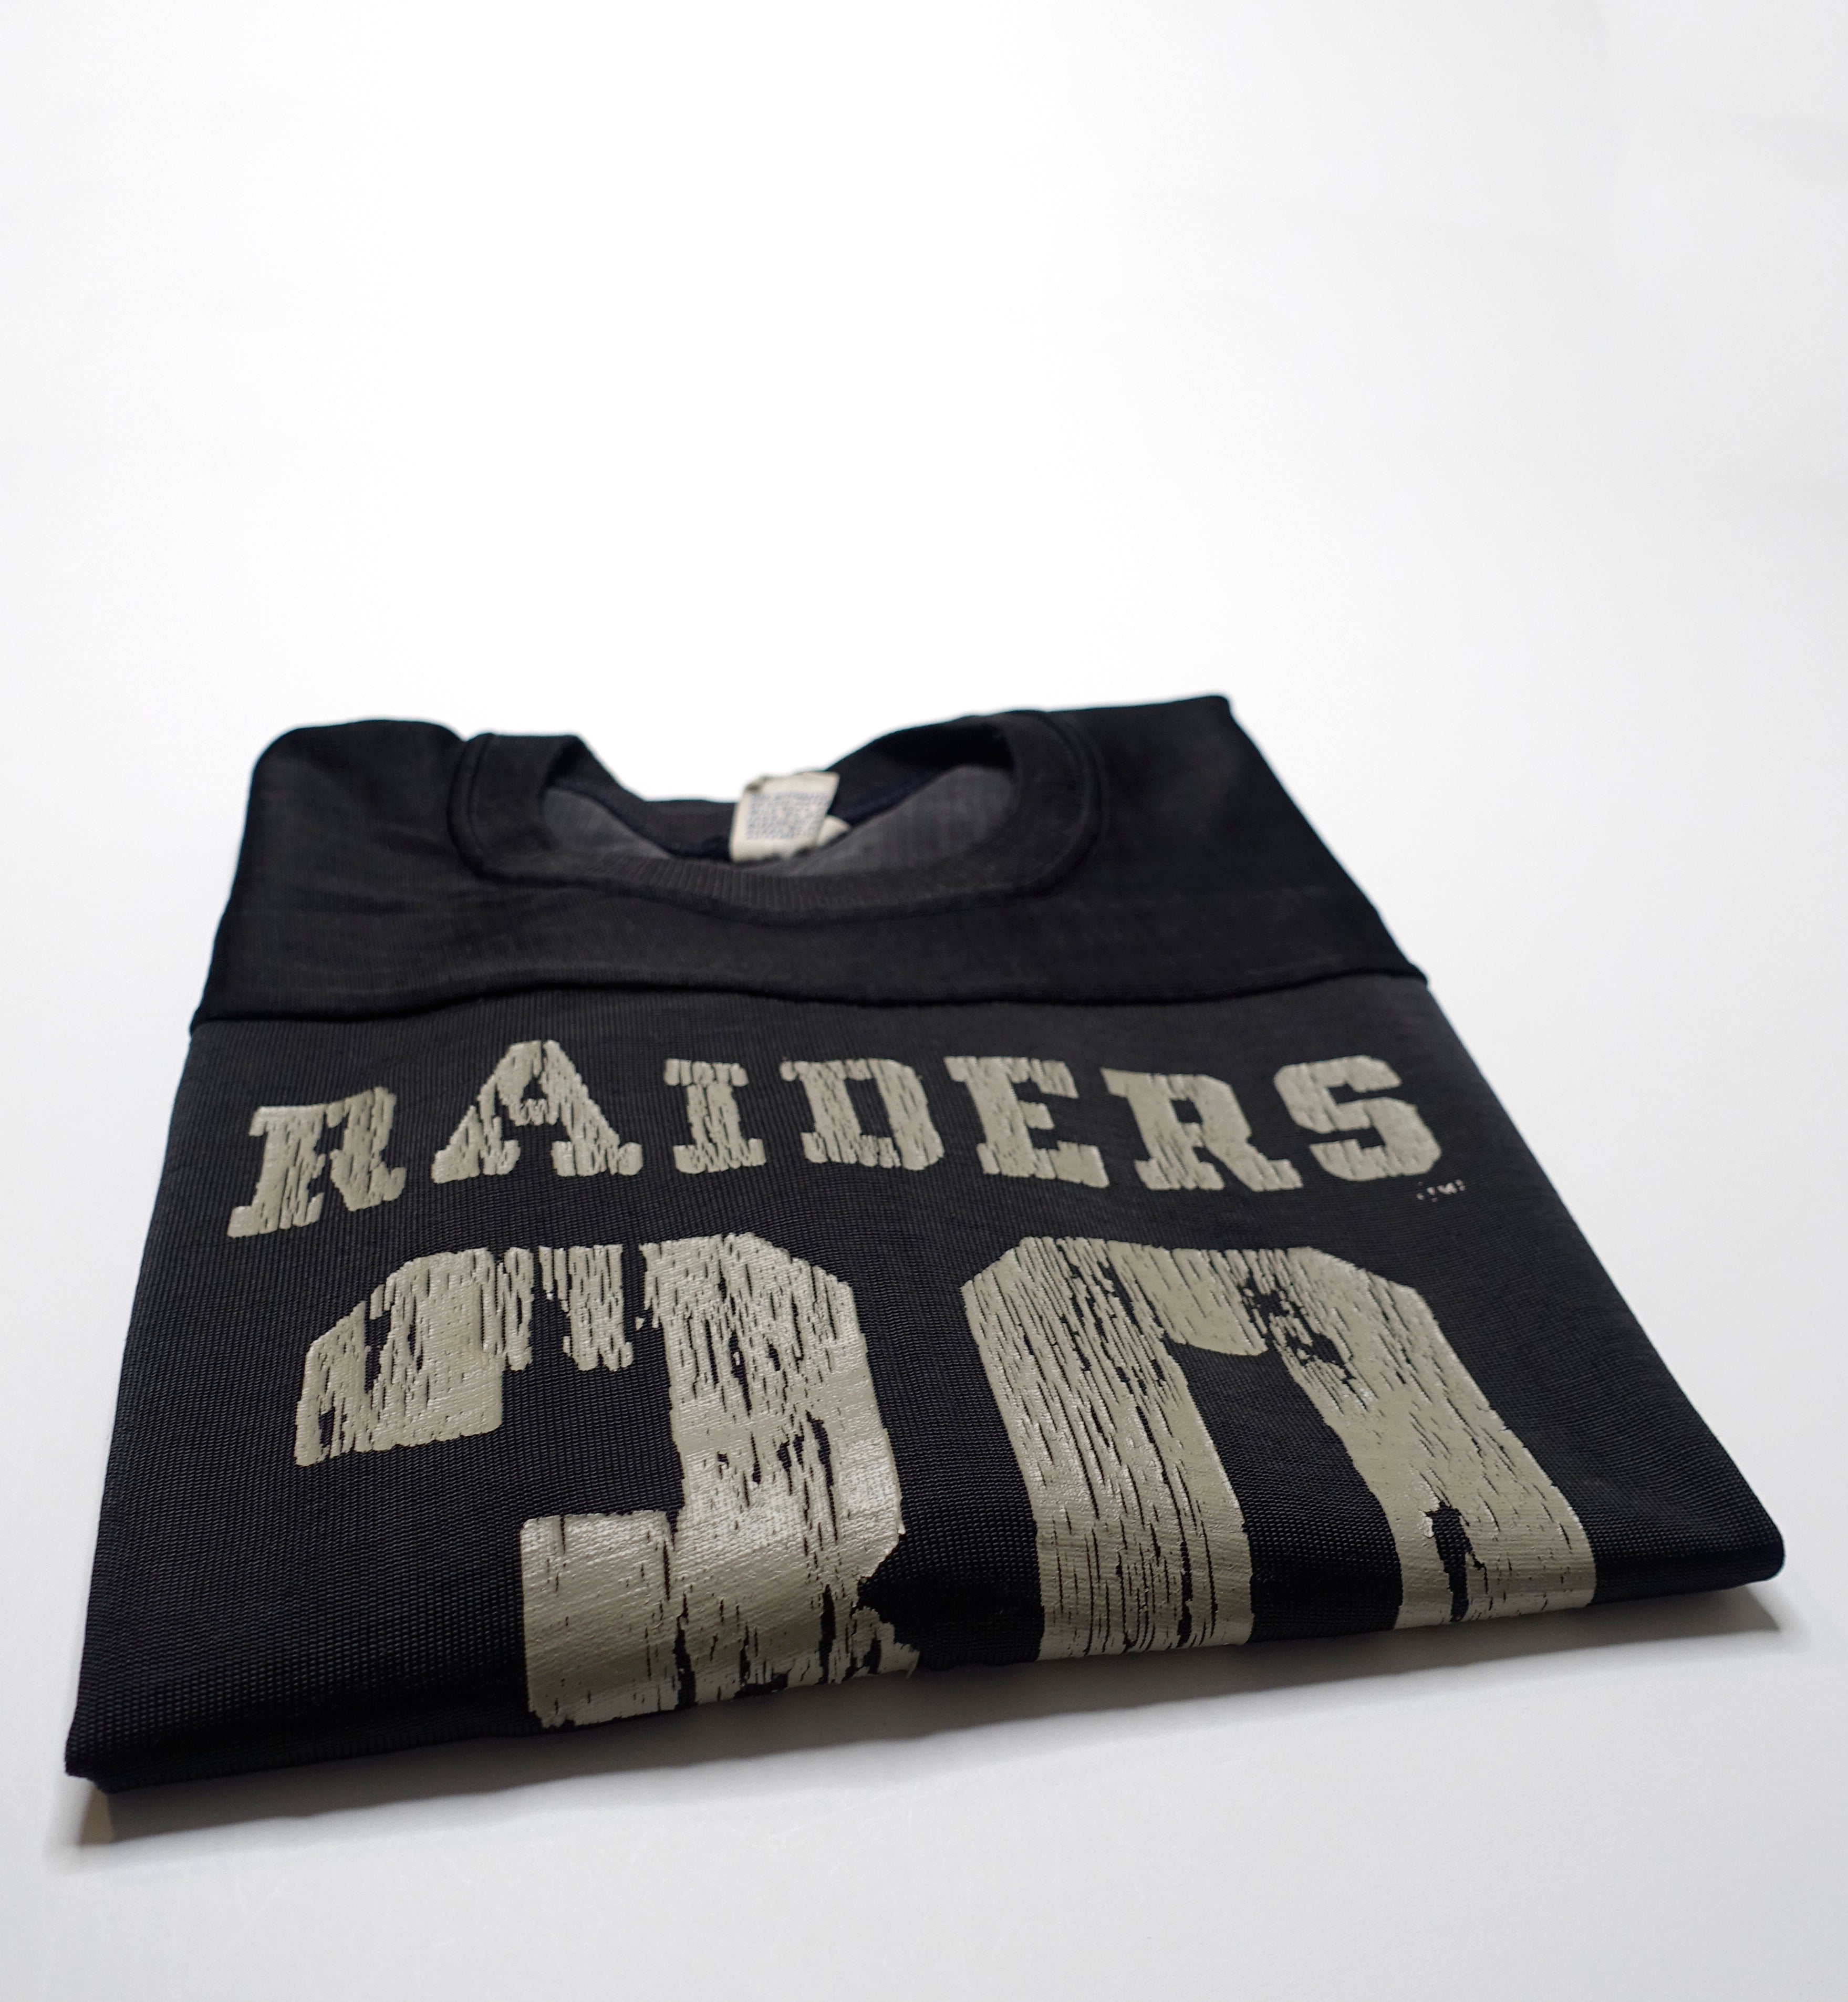 Los Angeles Raiders - Jersey Size Small